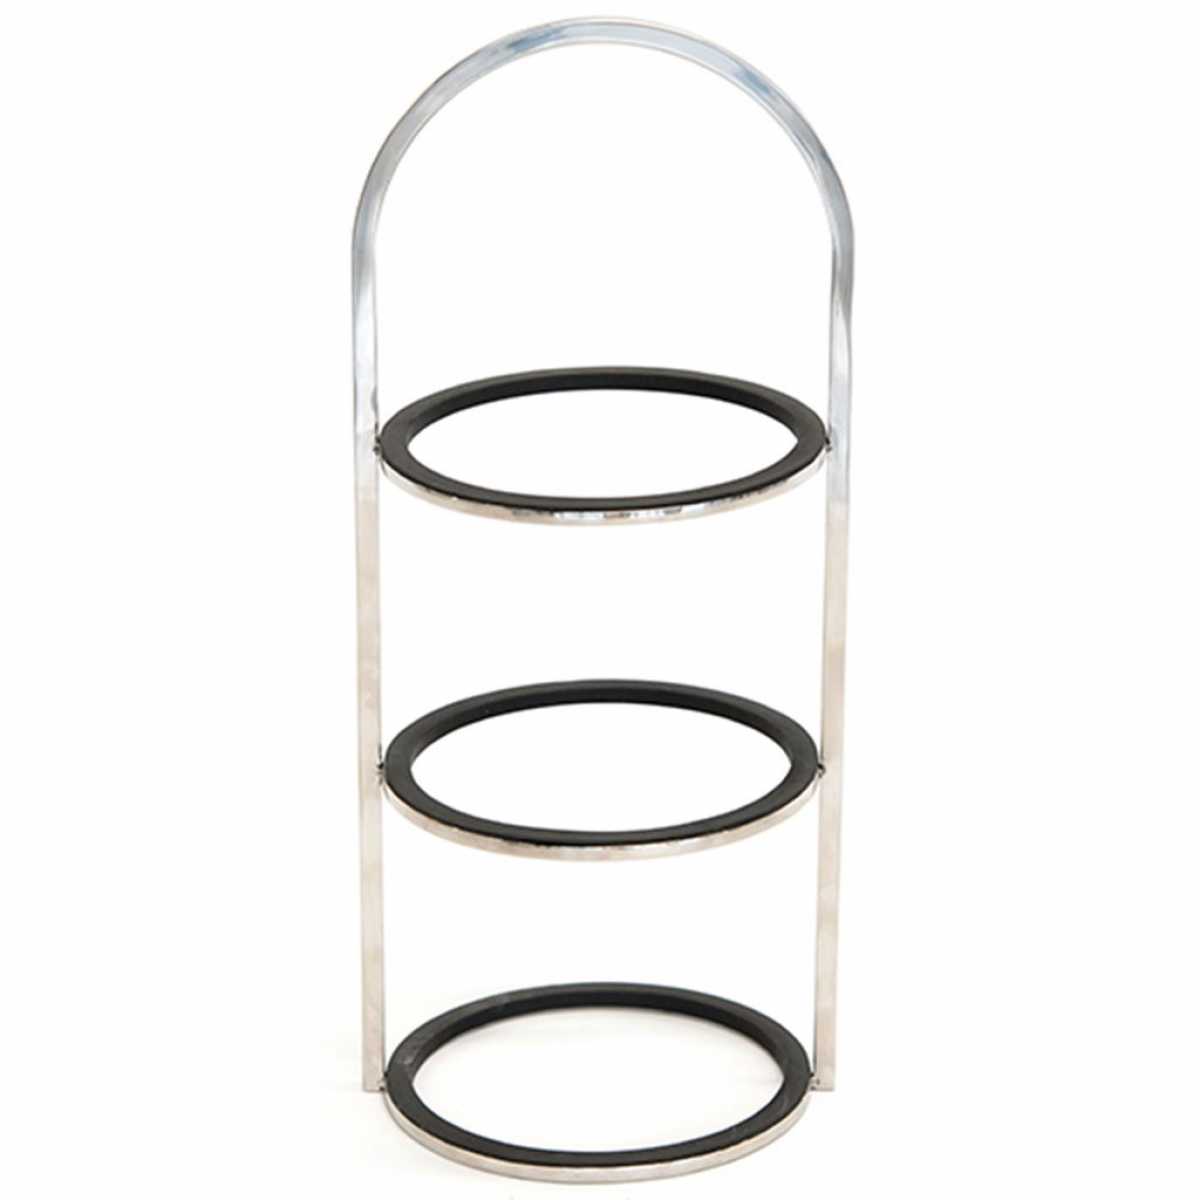 CRASTER Three Tier Round Riser - Polished Stainless Steel